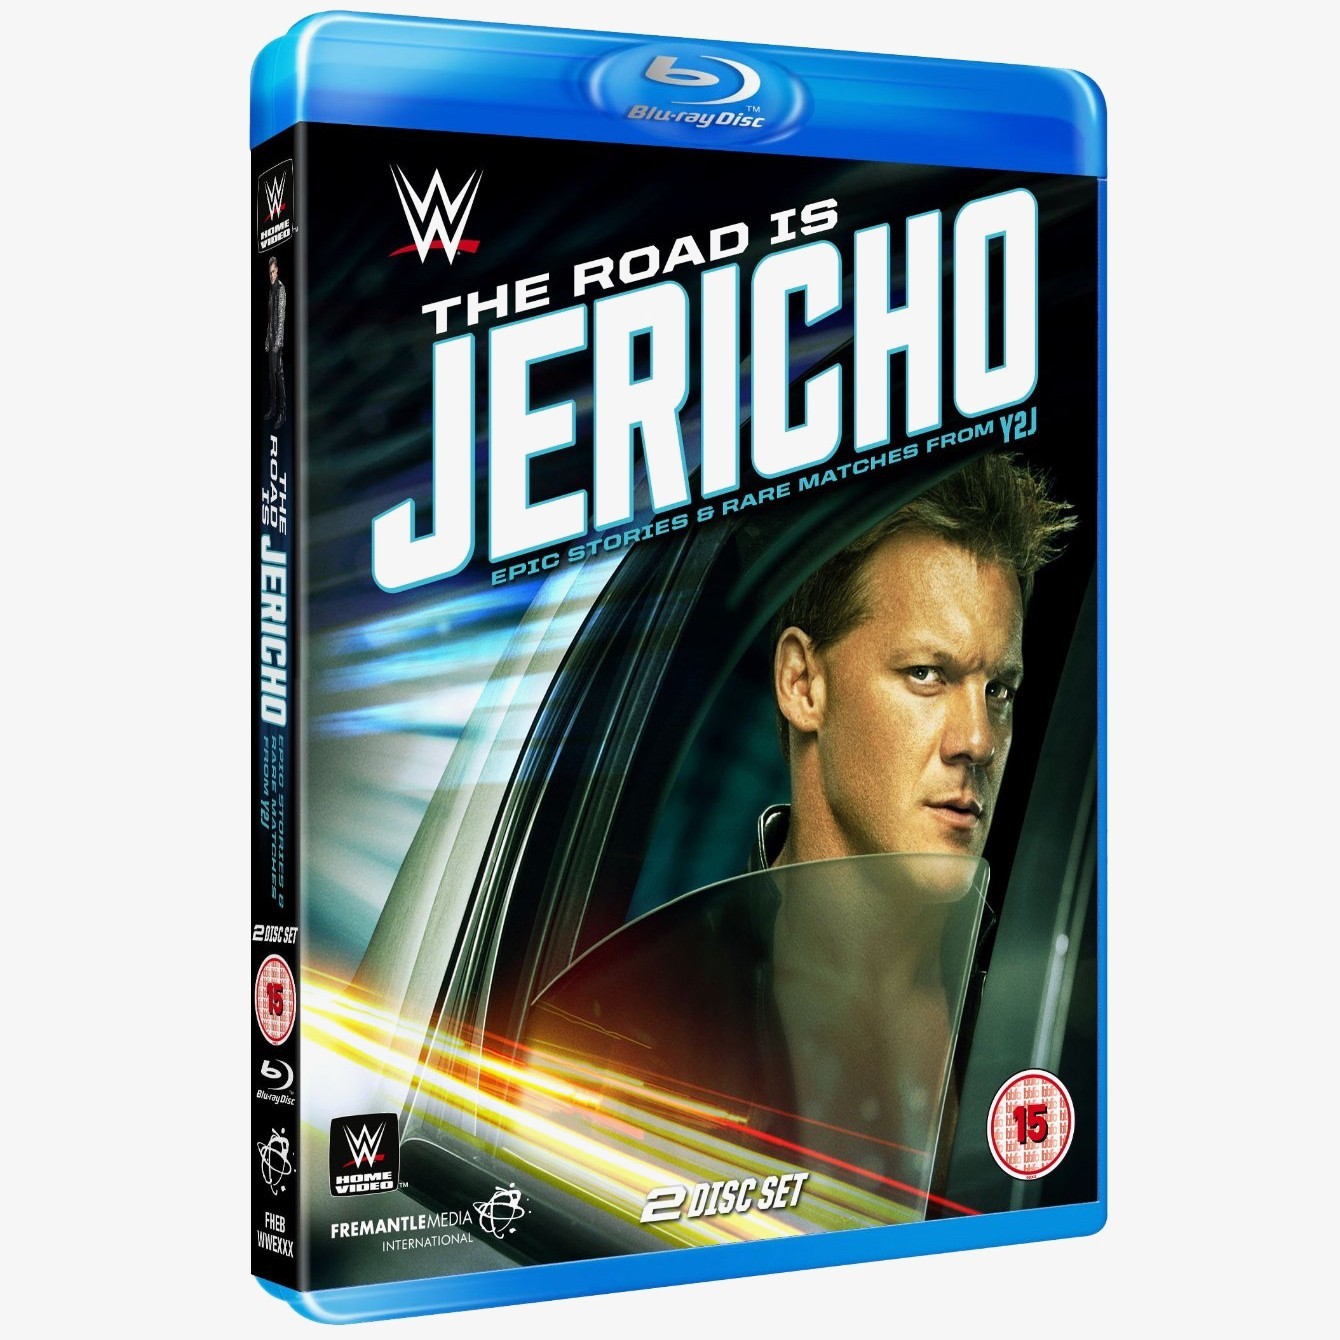 WWE The Road is Jericho - Epic Stories &amp; Rare Matches From Y2J Blu-ray